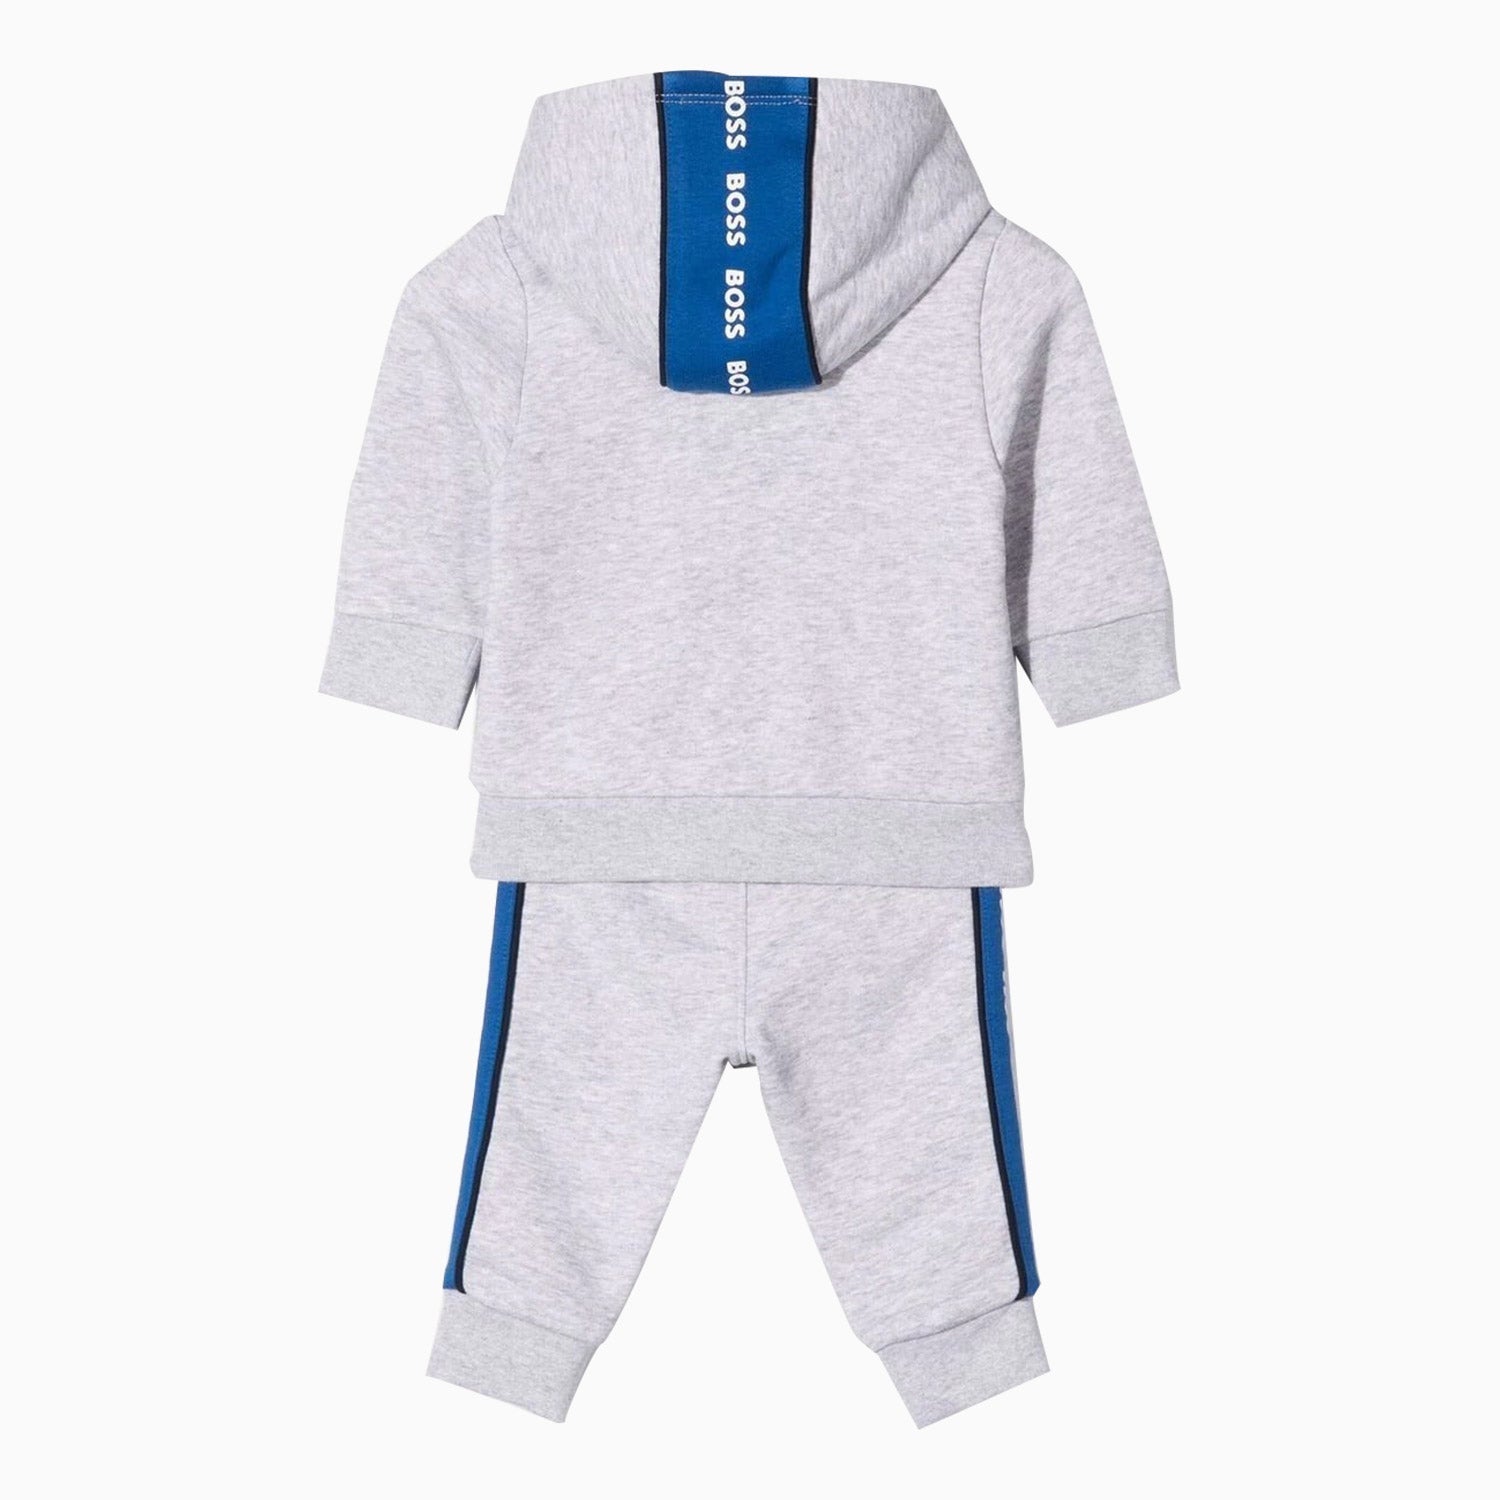 hugo-boss-kids-french-terry-track-suit-j08063-a32